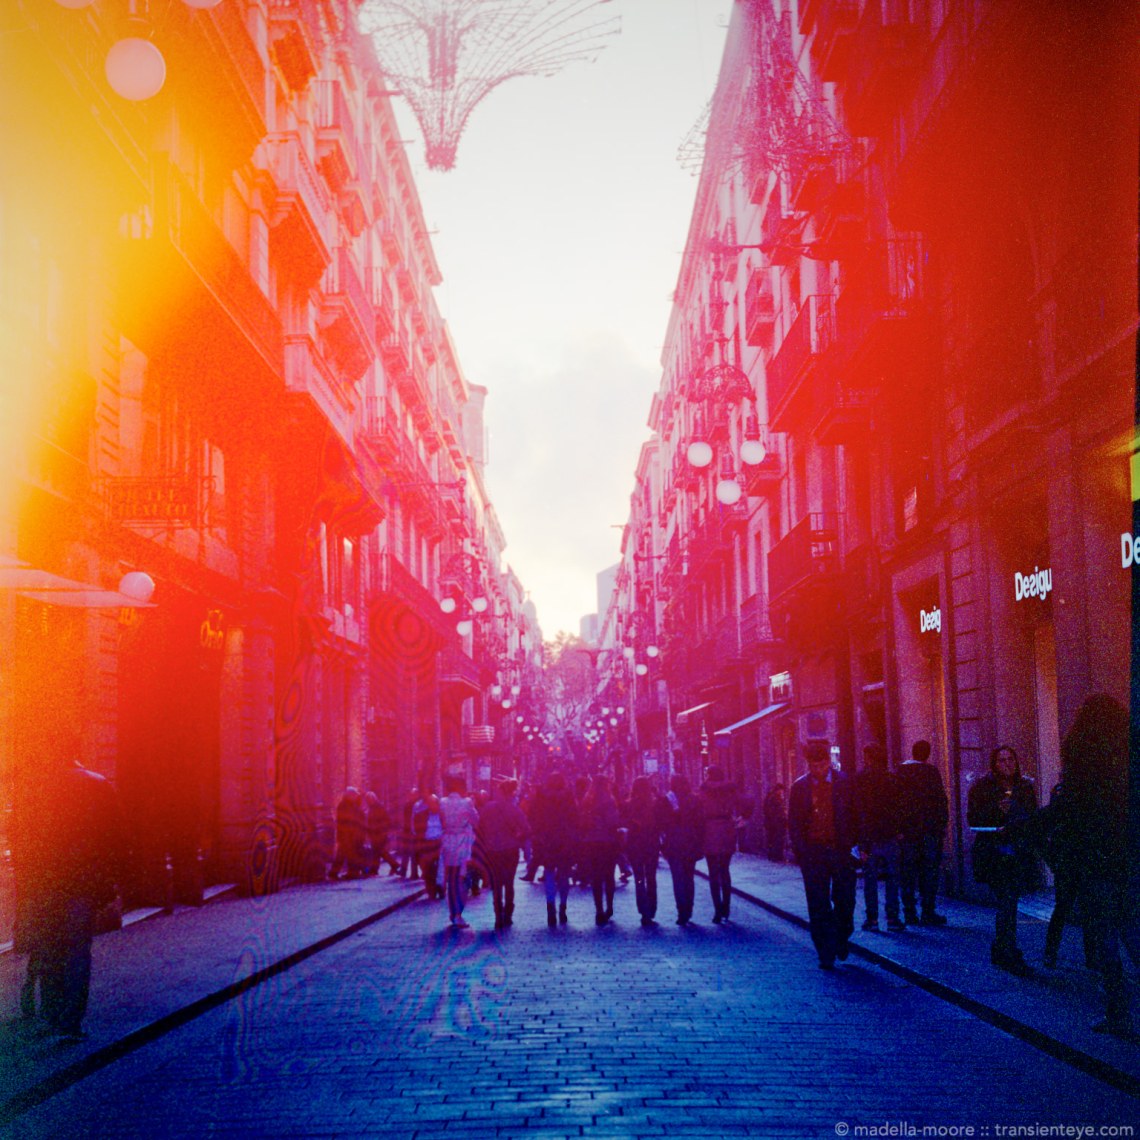 Light leaks and flare - now in colour!